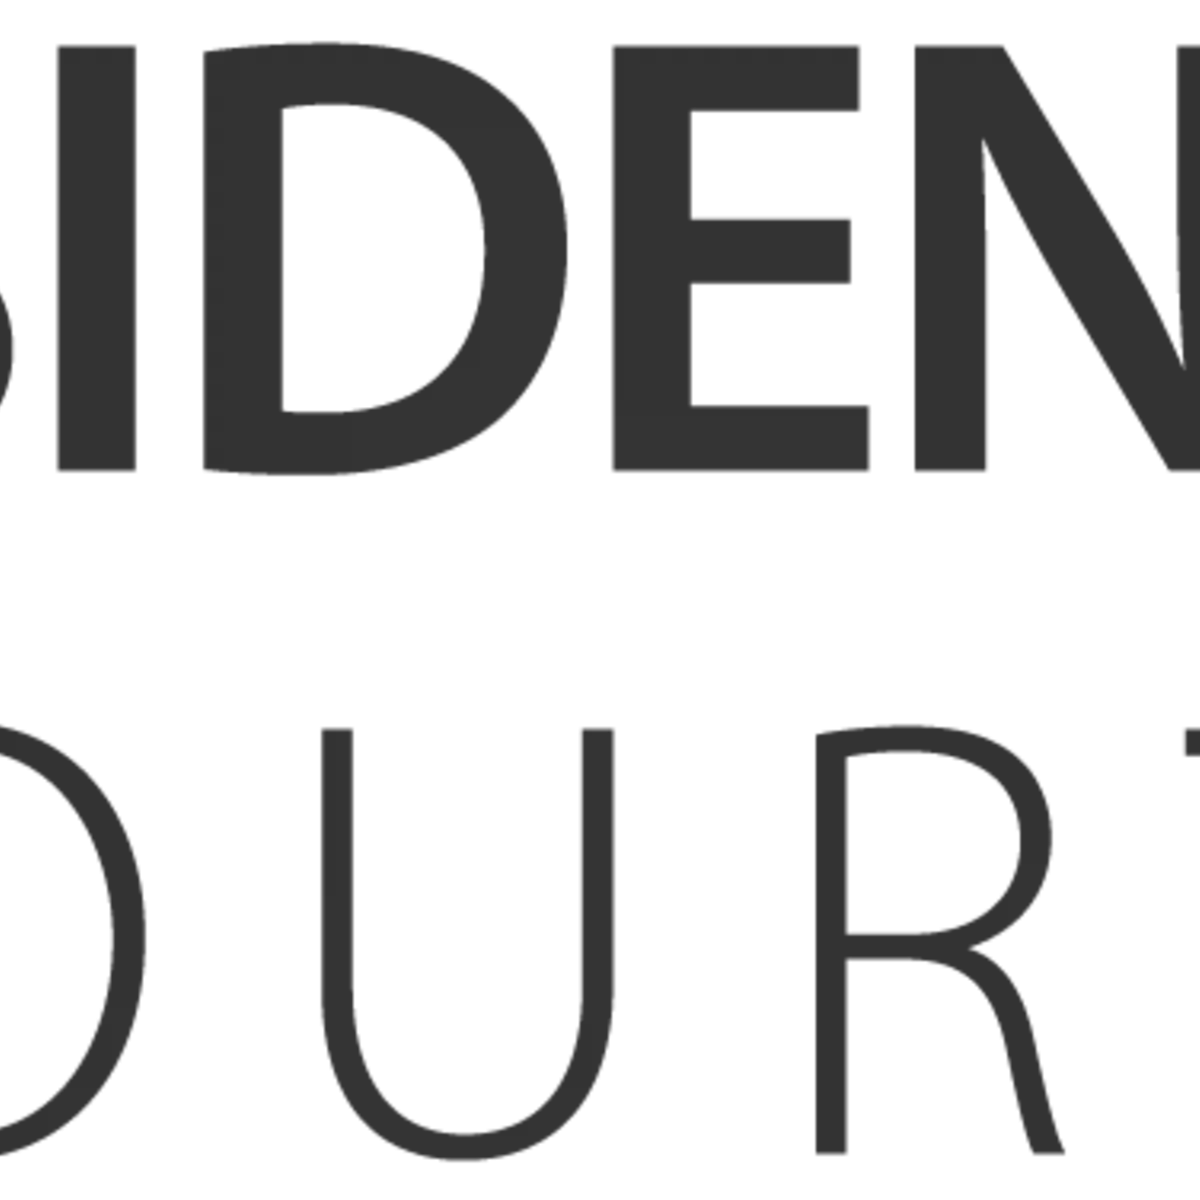 Presidential Courts